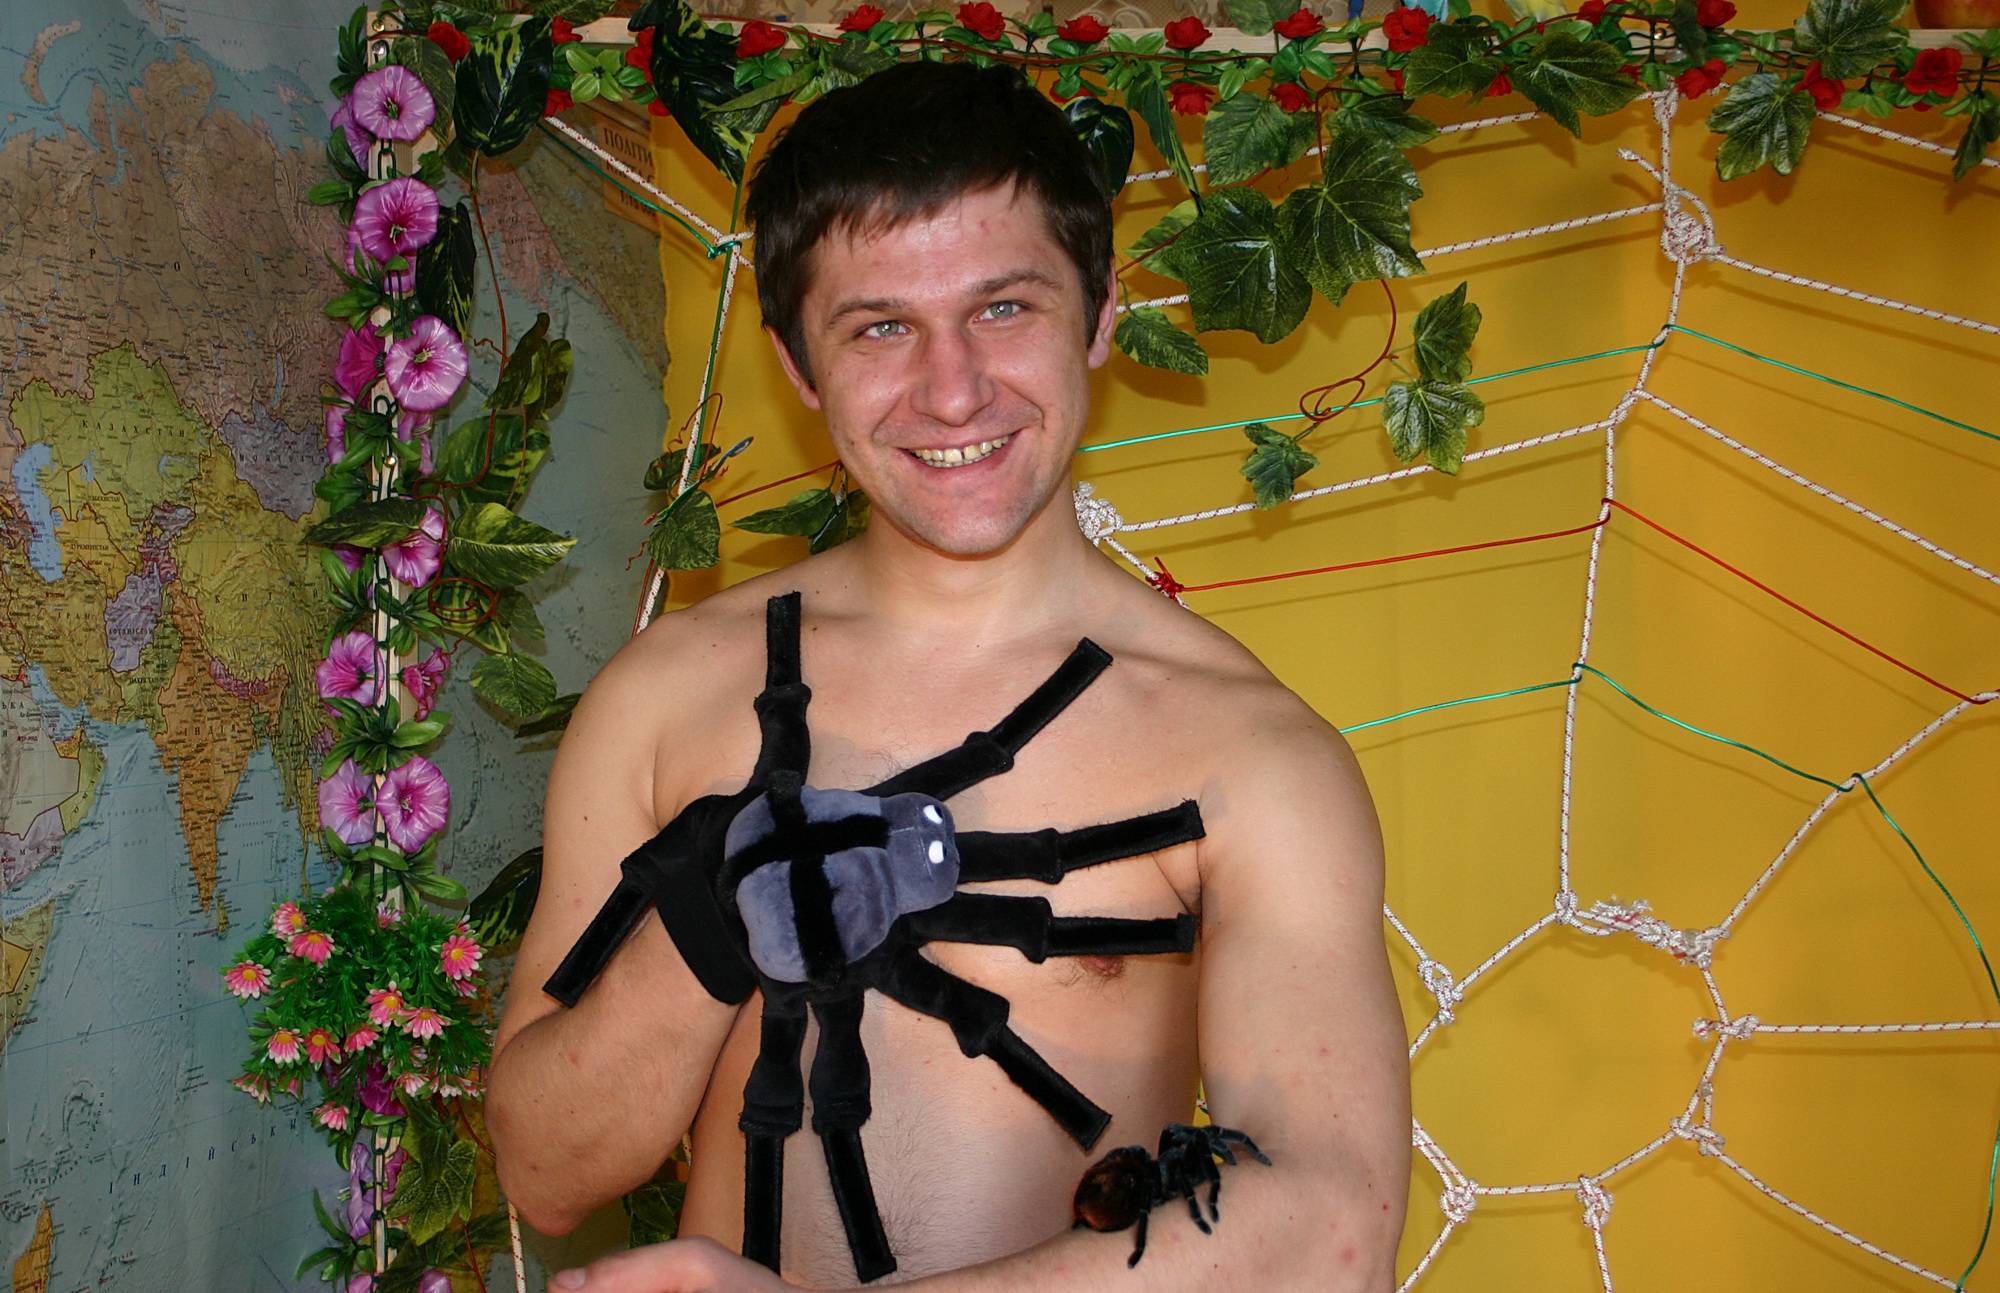 Pure Nudism Images-Real-Life Scorpion Display - 4